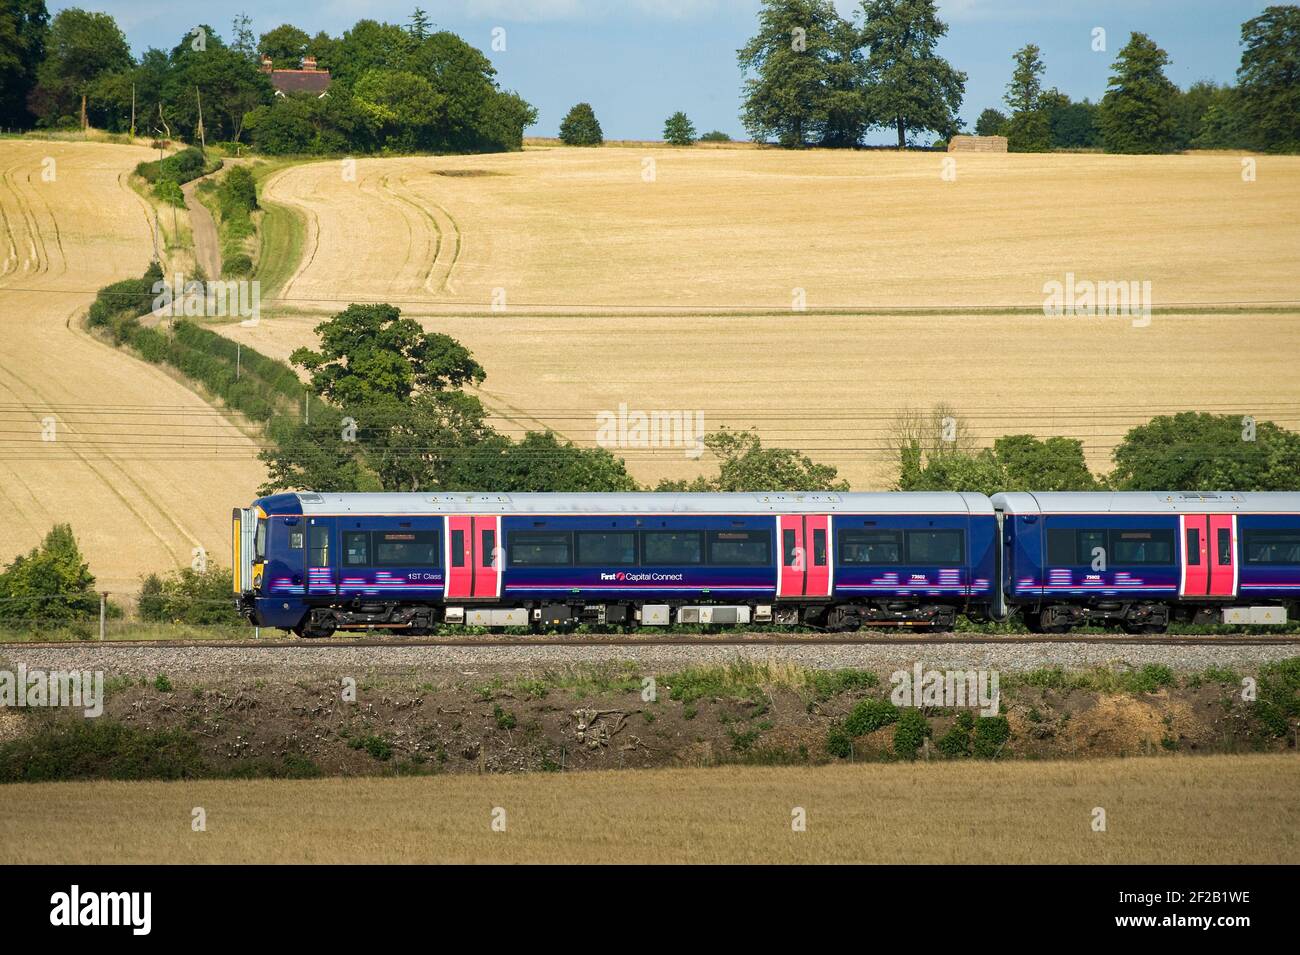 Class 377 passenger train in First Capital Connect livery speeding through the English countryside. Stock Photo